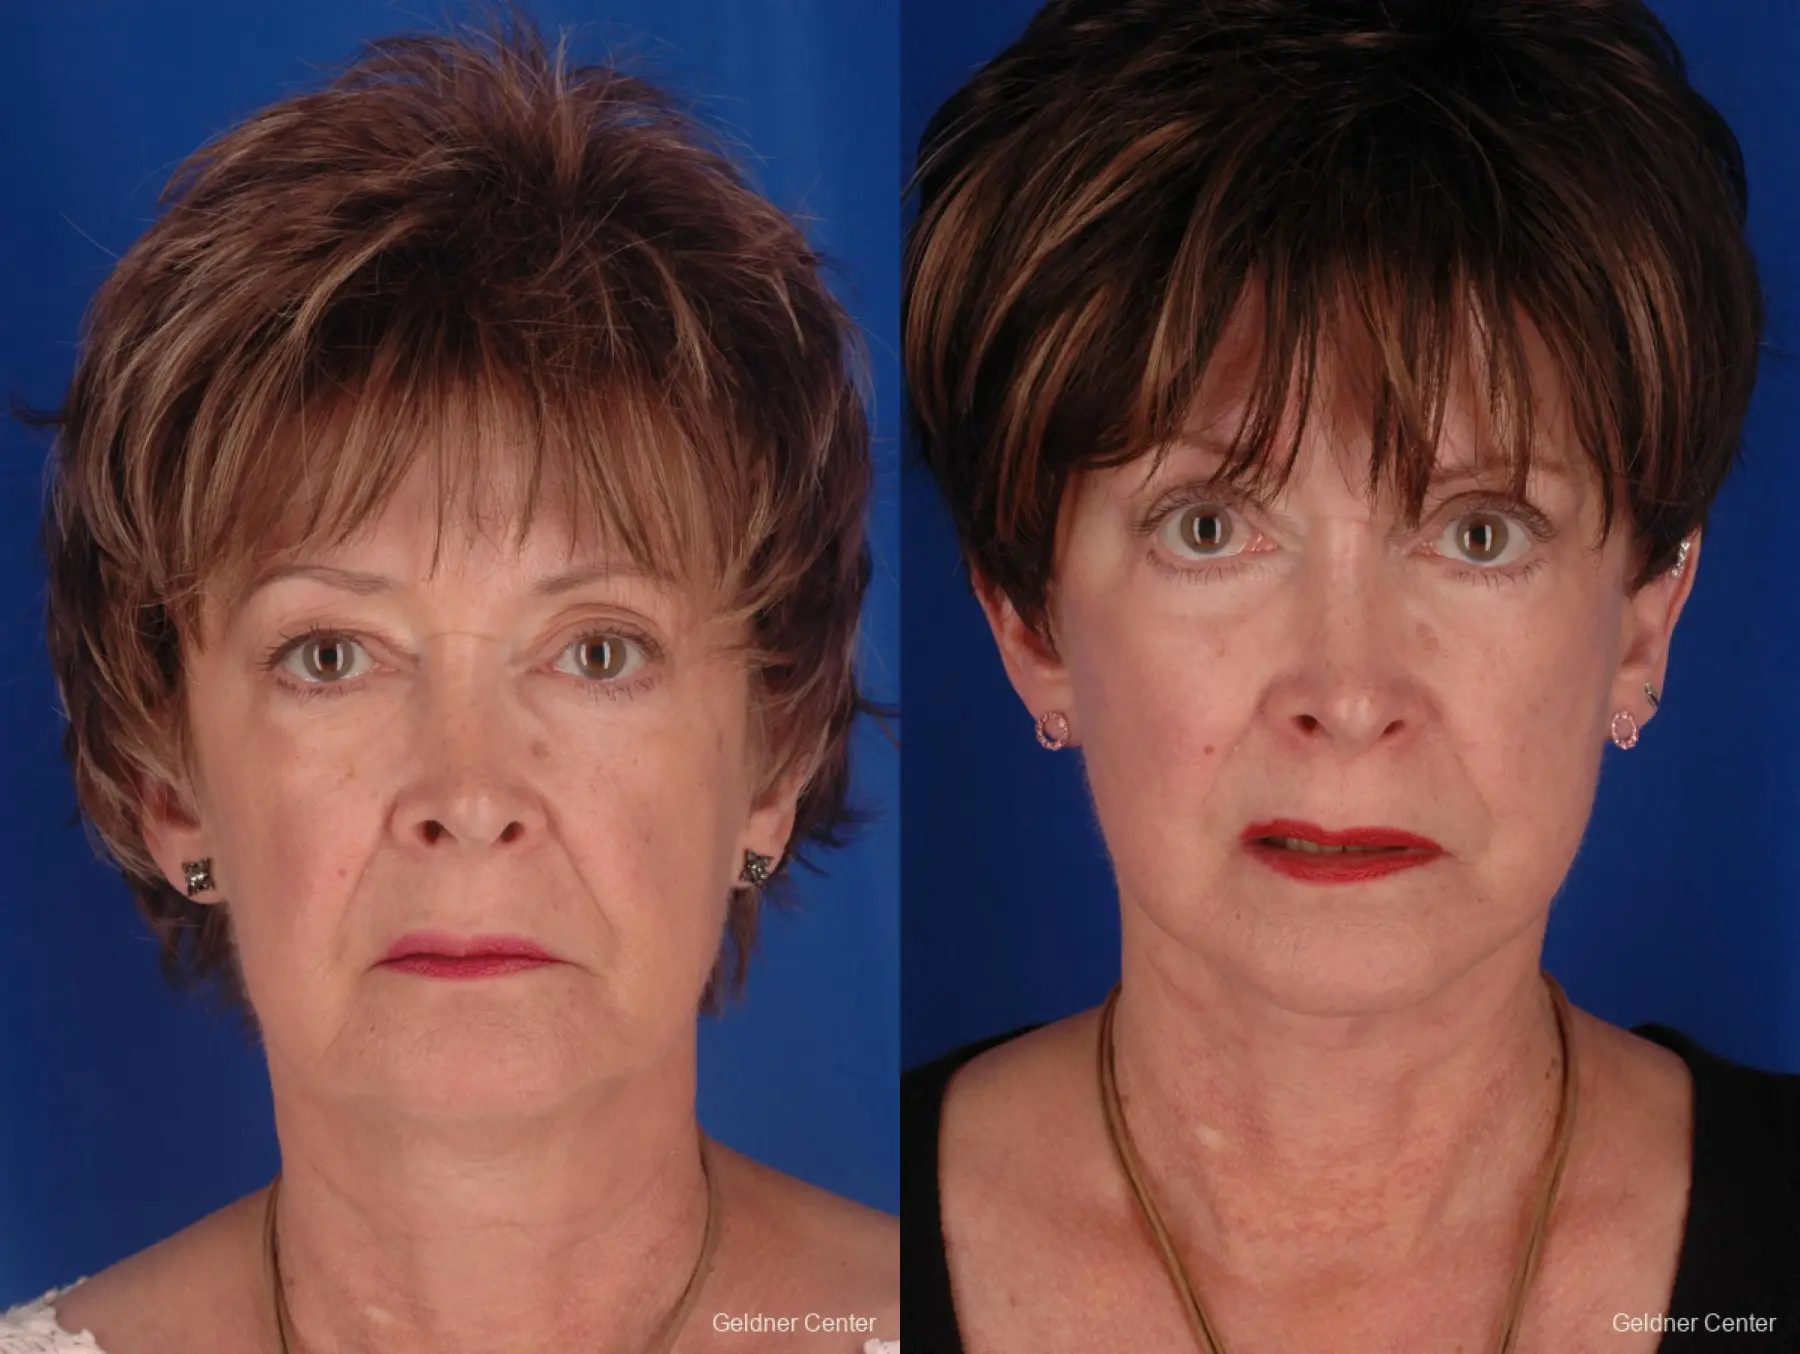 59 year old woman, upper and lower lid blepharoplasty - Before and After 3